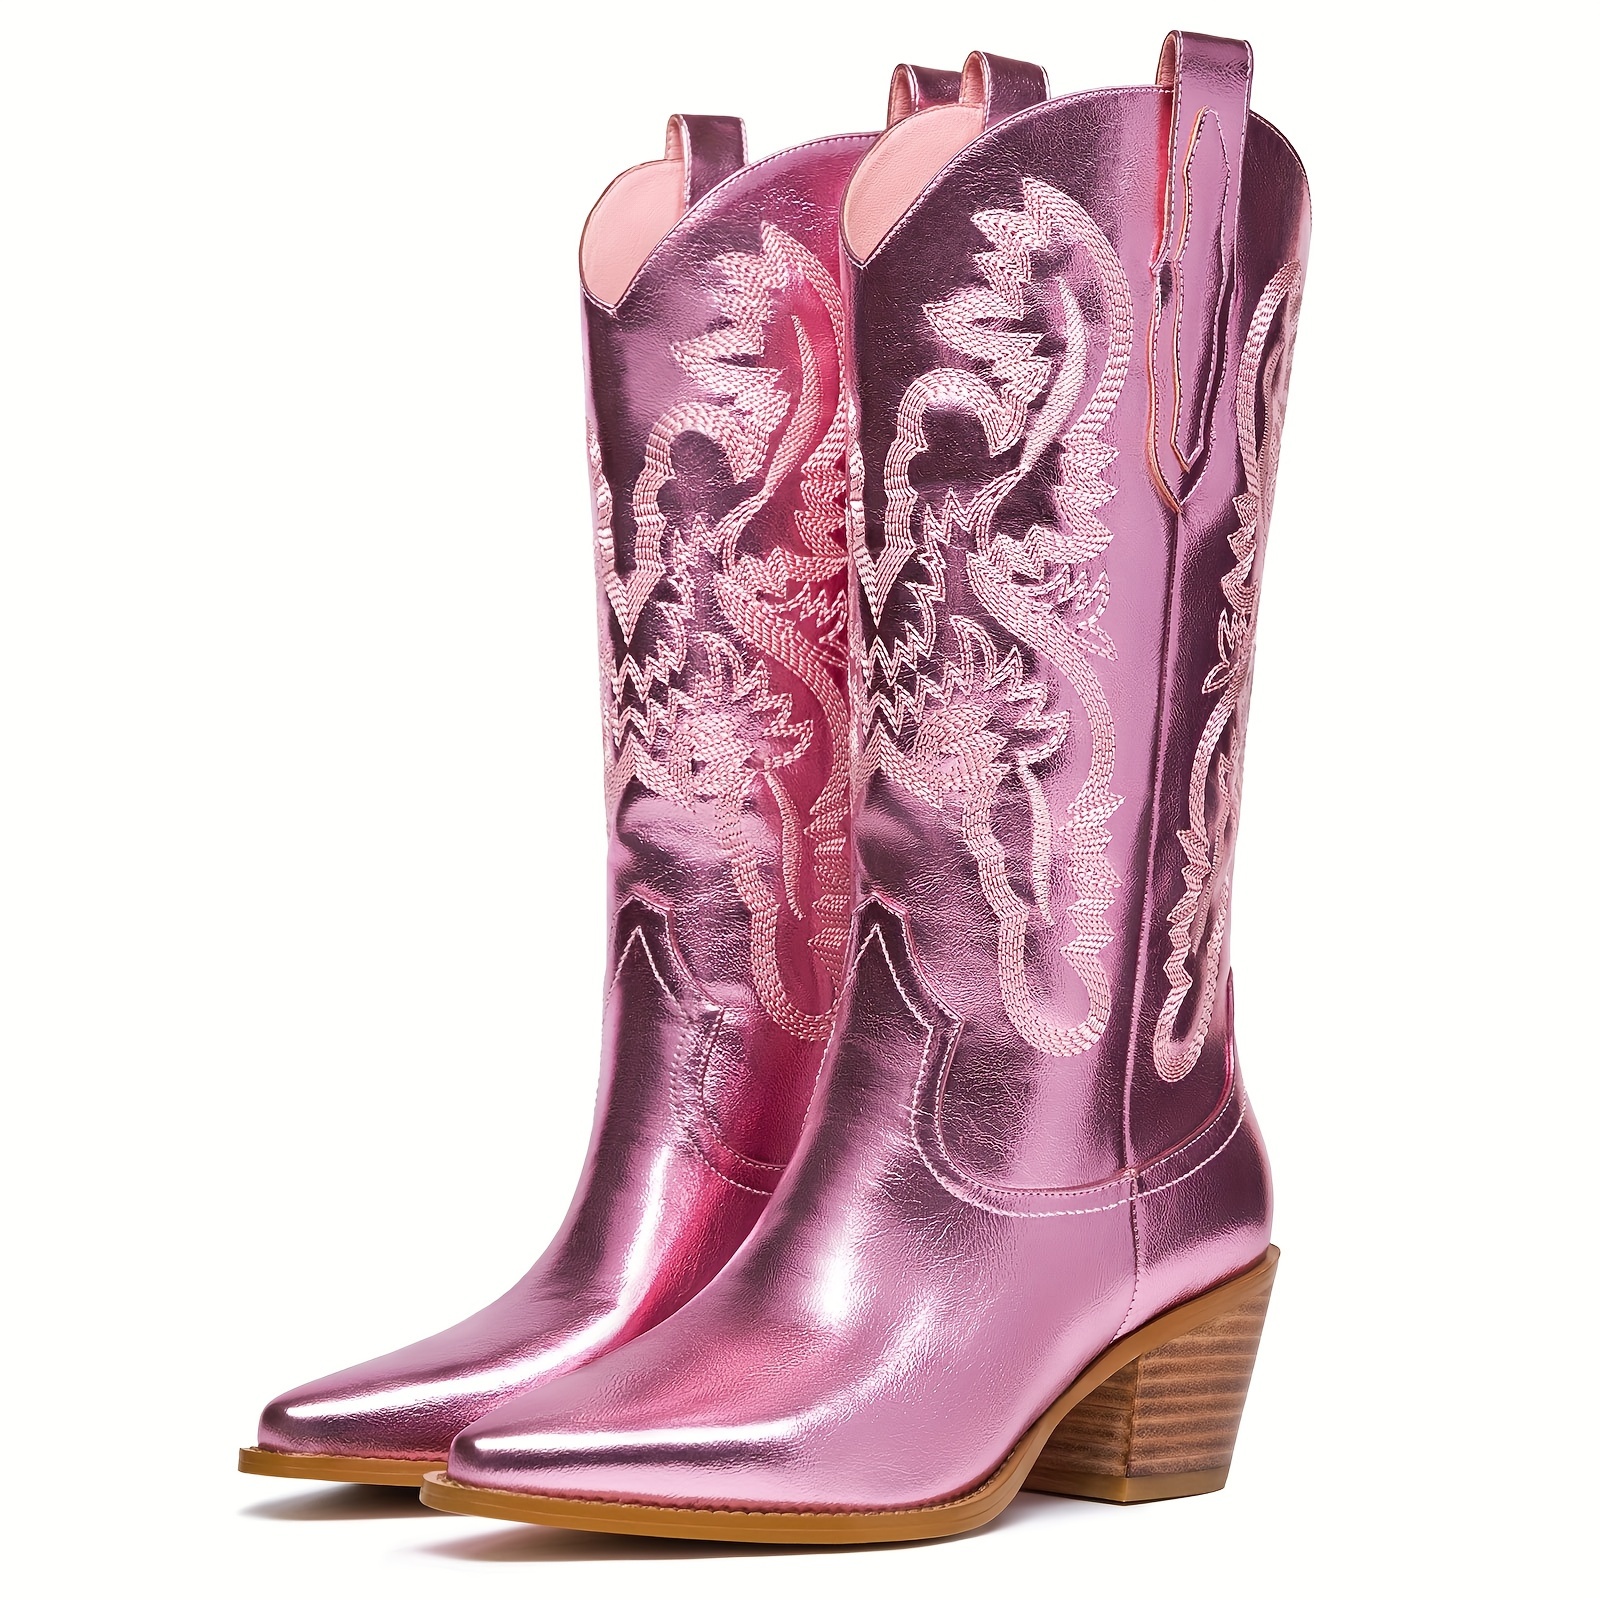 

Women's Cowboy Boots, Embroidered Cowgirl Boots, Western Boots, Pointed Toe Block Heel Pull-on Boots